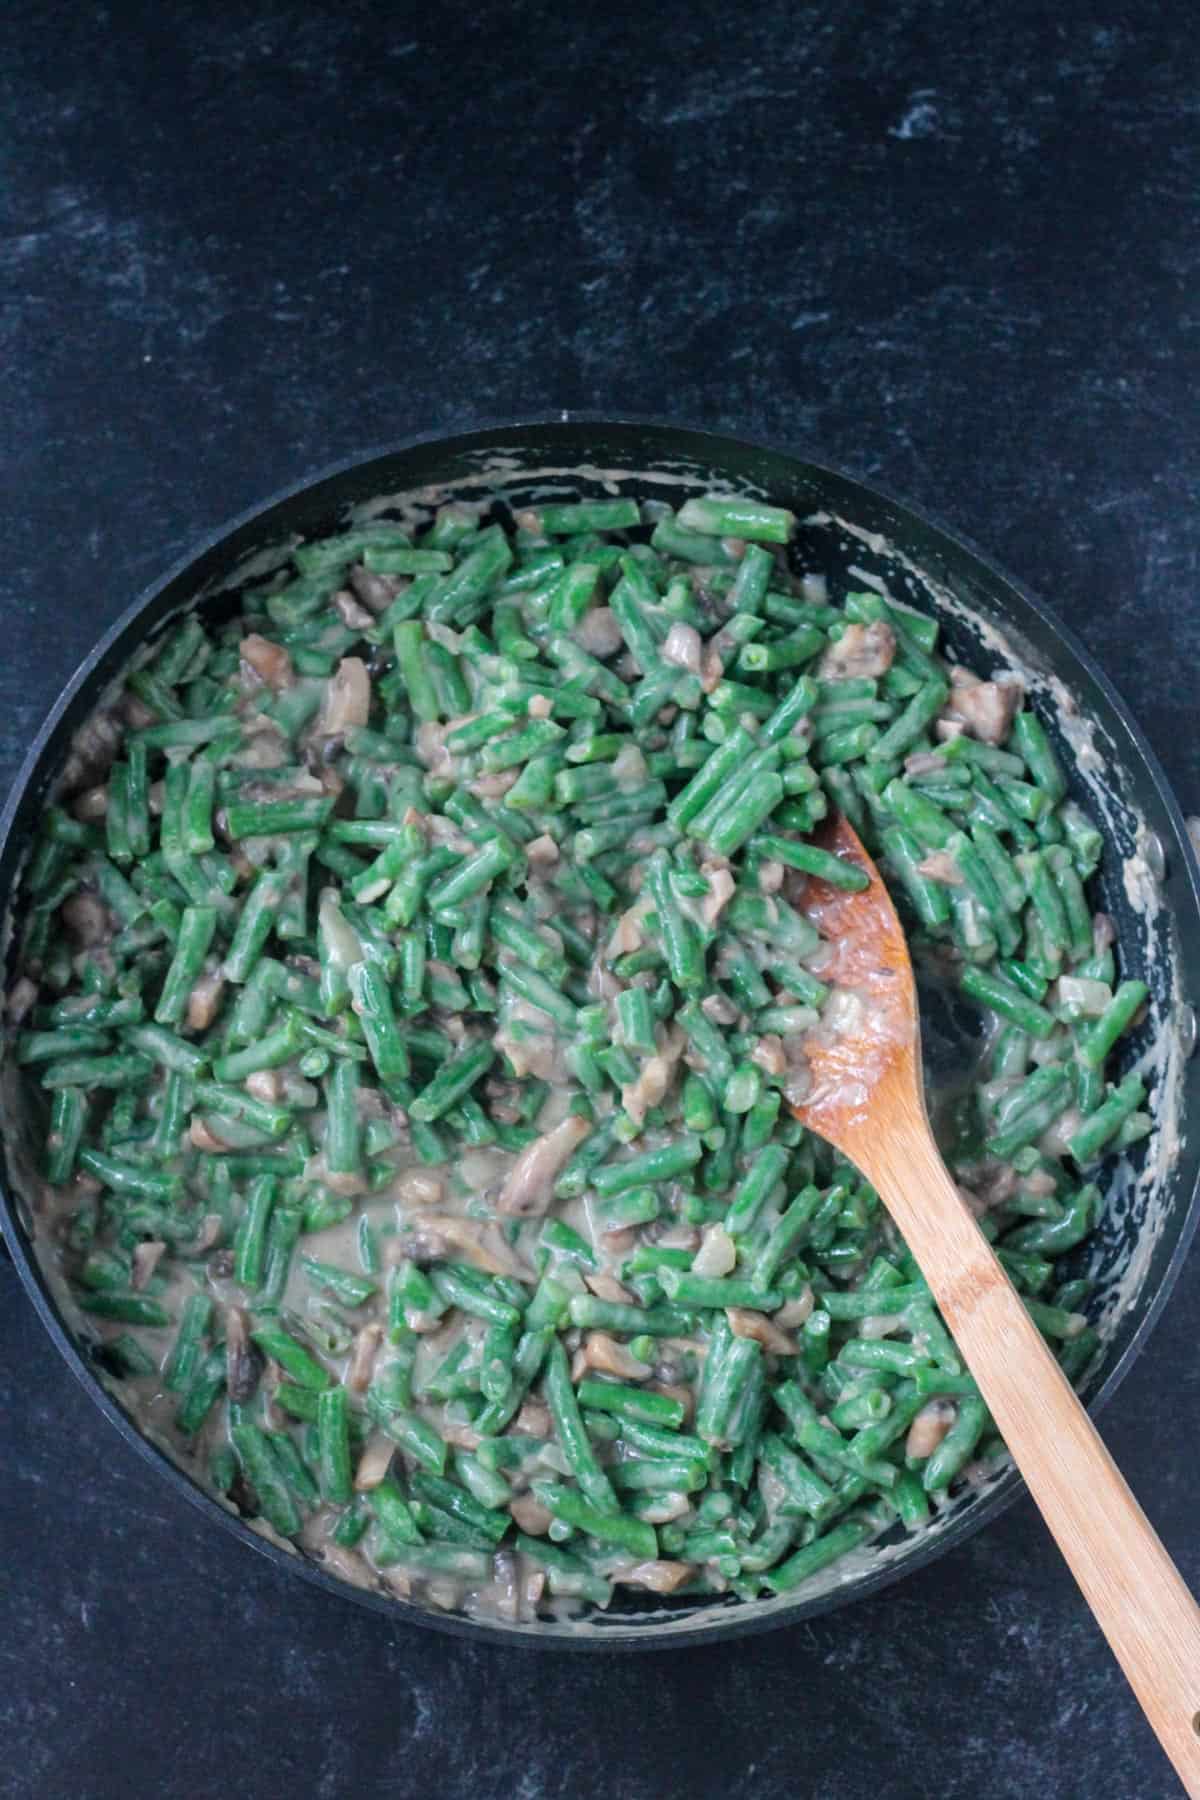 Mixing the green beans into the mushroom sauce.